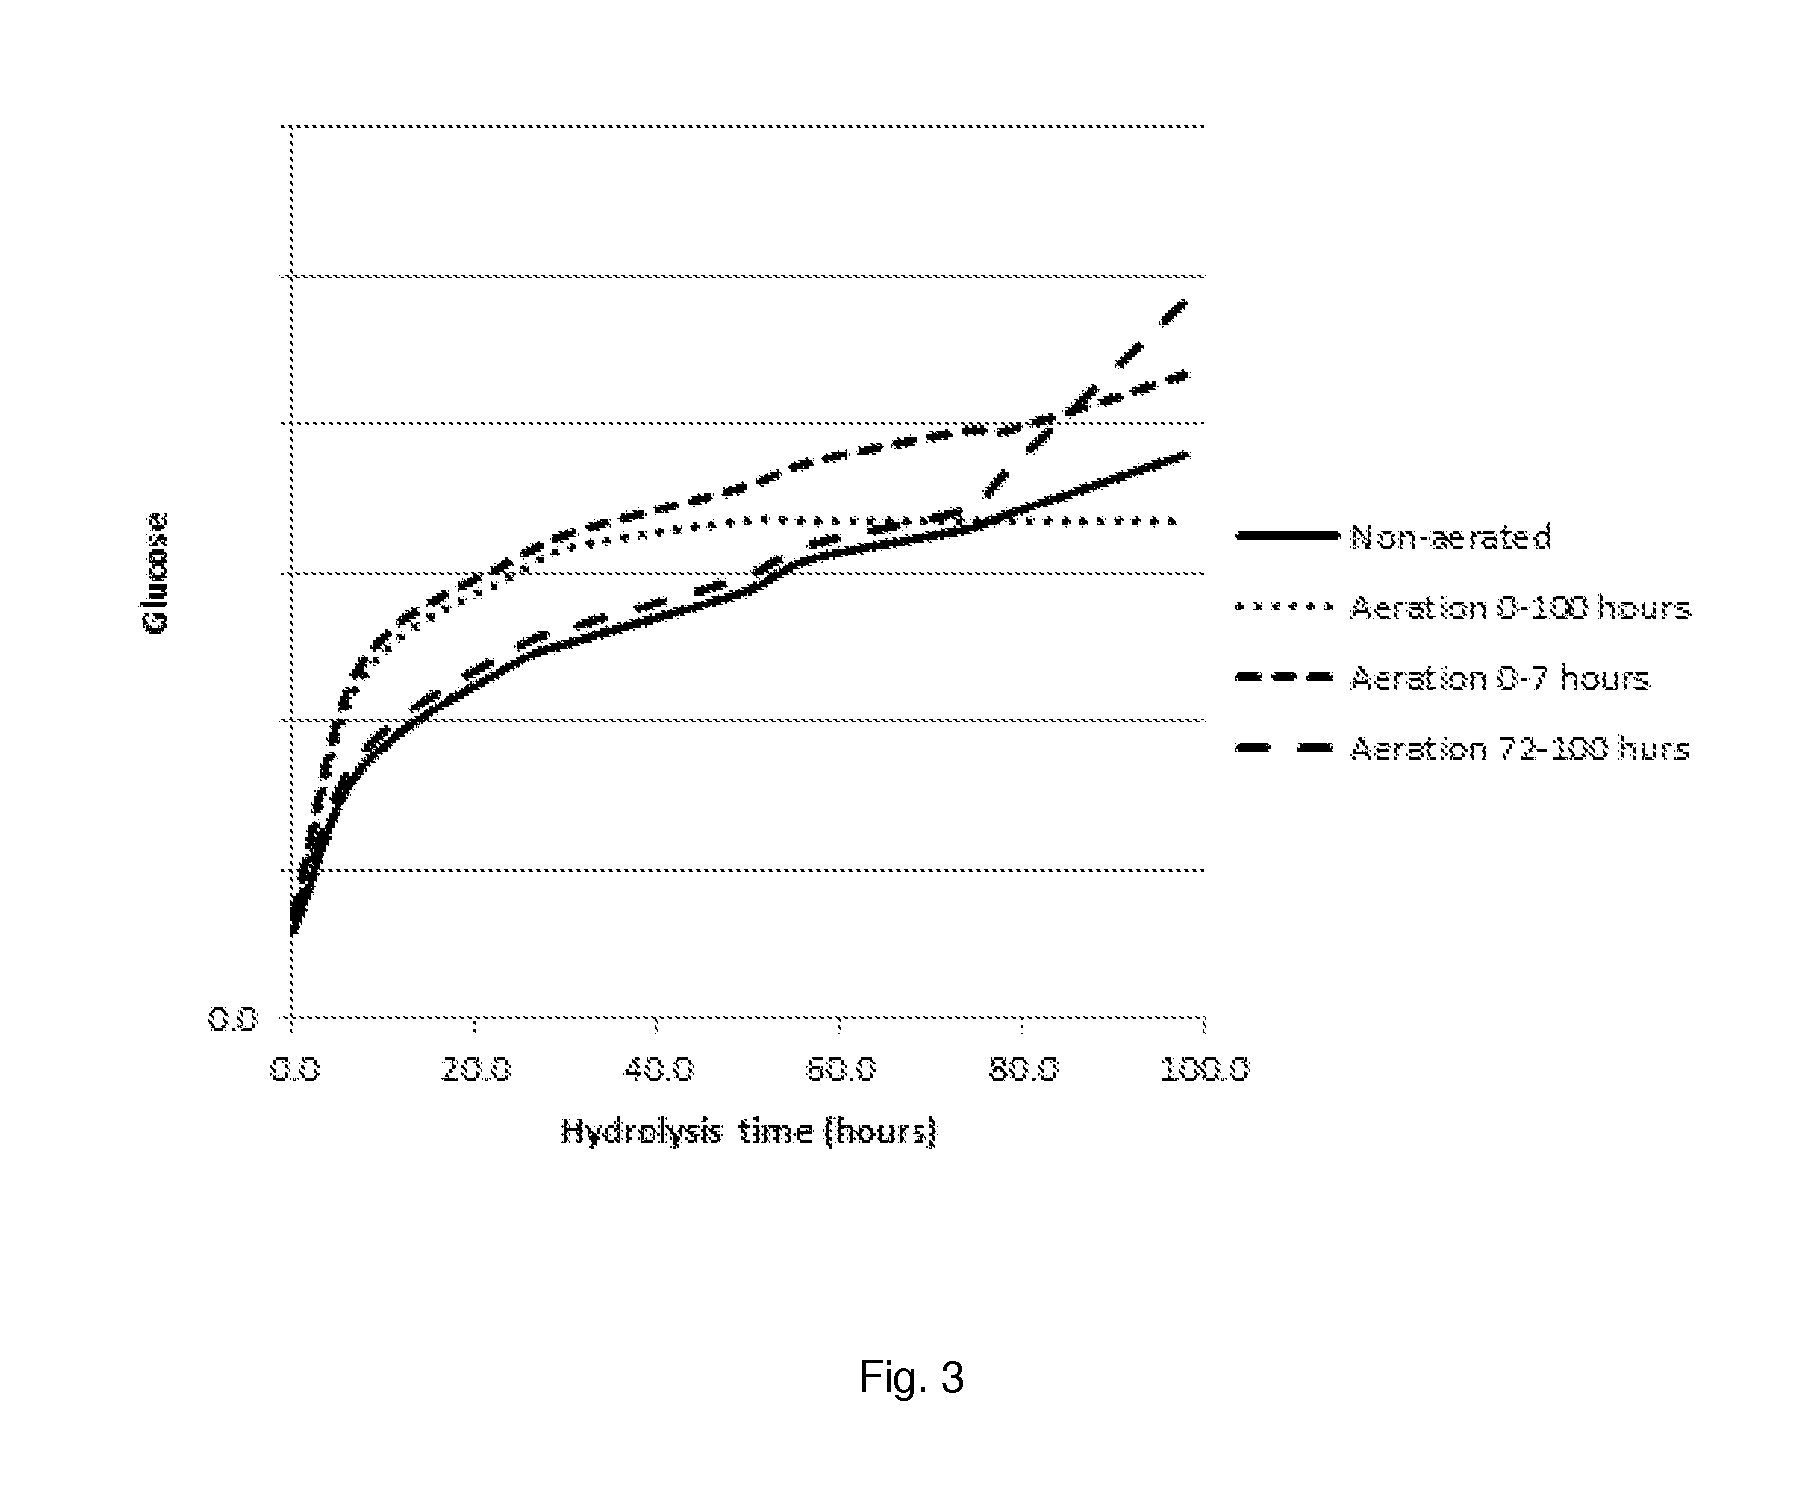 Process for enzymatic hydrolysis of lignocellulosic material and fermentation of sugars